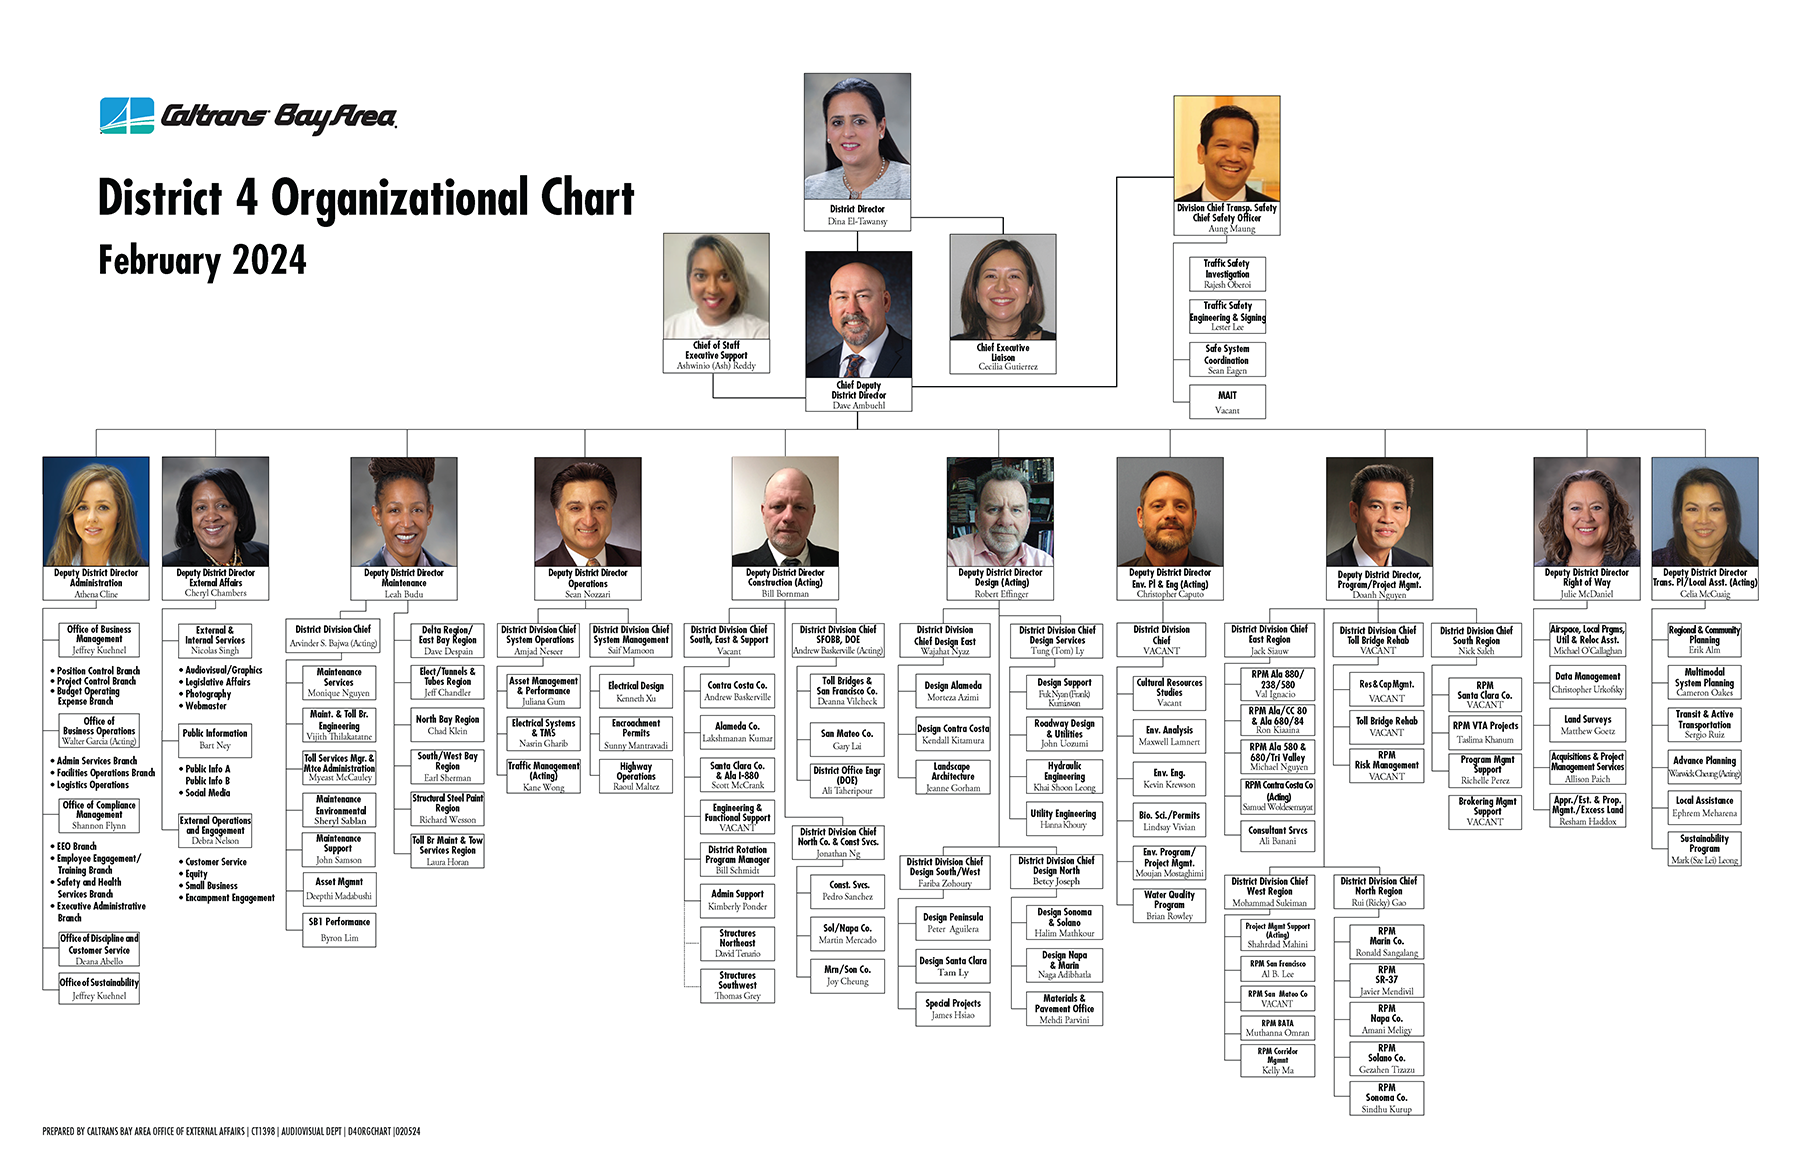 Caltrans District 4 Organizational Chart. February 2024. District Director: Dina El-Tawansy. Chief Deputy District Director: Dave Ambuehl. Chief Executive Liaison: Cecilia Gutierrez. Chief of Staff Executive Support: Ashwinio (Ash) Reddy. Division Chief Transp. Safety Chief Safety Officer: Aung Maung. Deputy District Director Administration: Athena Cline. Deputy District Director External Affairs: Cheryl Chambers. Deputy District Director Maintenance: Leah Budu. Deputy District Director Traffic Operations Sean Nozzari. Deputy District Director Construction (Acting): Bill Bornman. Deputy District Director Design: Helena (Lenka) Culik-Caro. Deputy District Director Env. Planning & Engineering (Acting): Christopher Caputo. Deputy District Director, Program/Project Mgmt.: Doanh Nguyen. Deputy District Director Right of Way: Julie McDaniel. Deputy District Director Trans. Planning/Local Asst. (Acting).: Tanzeeba Kishwar.